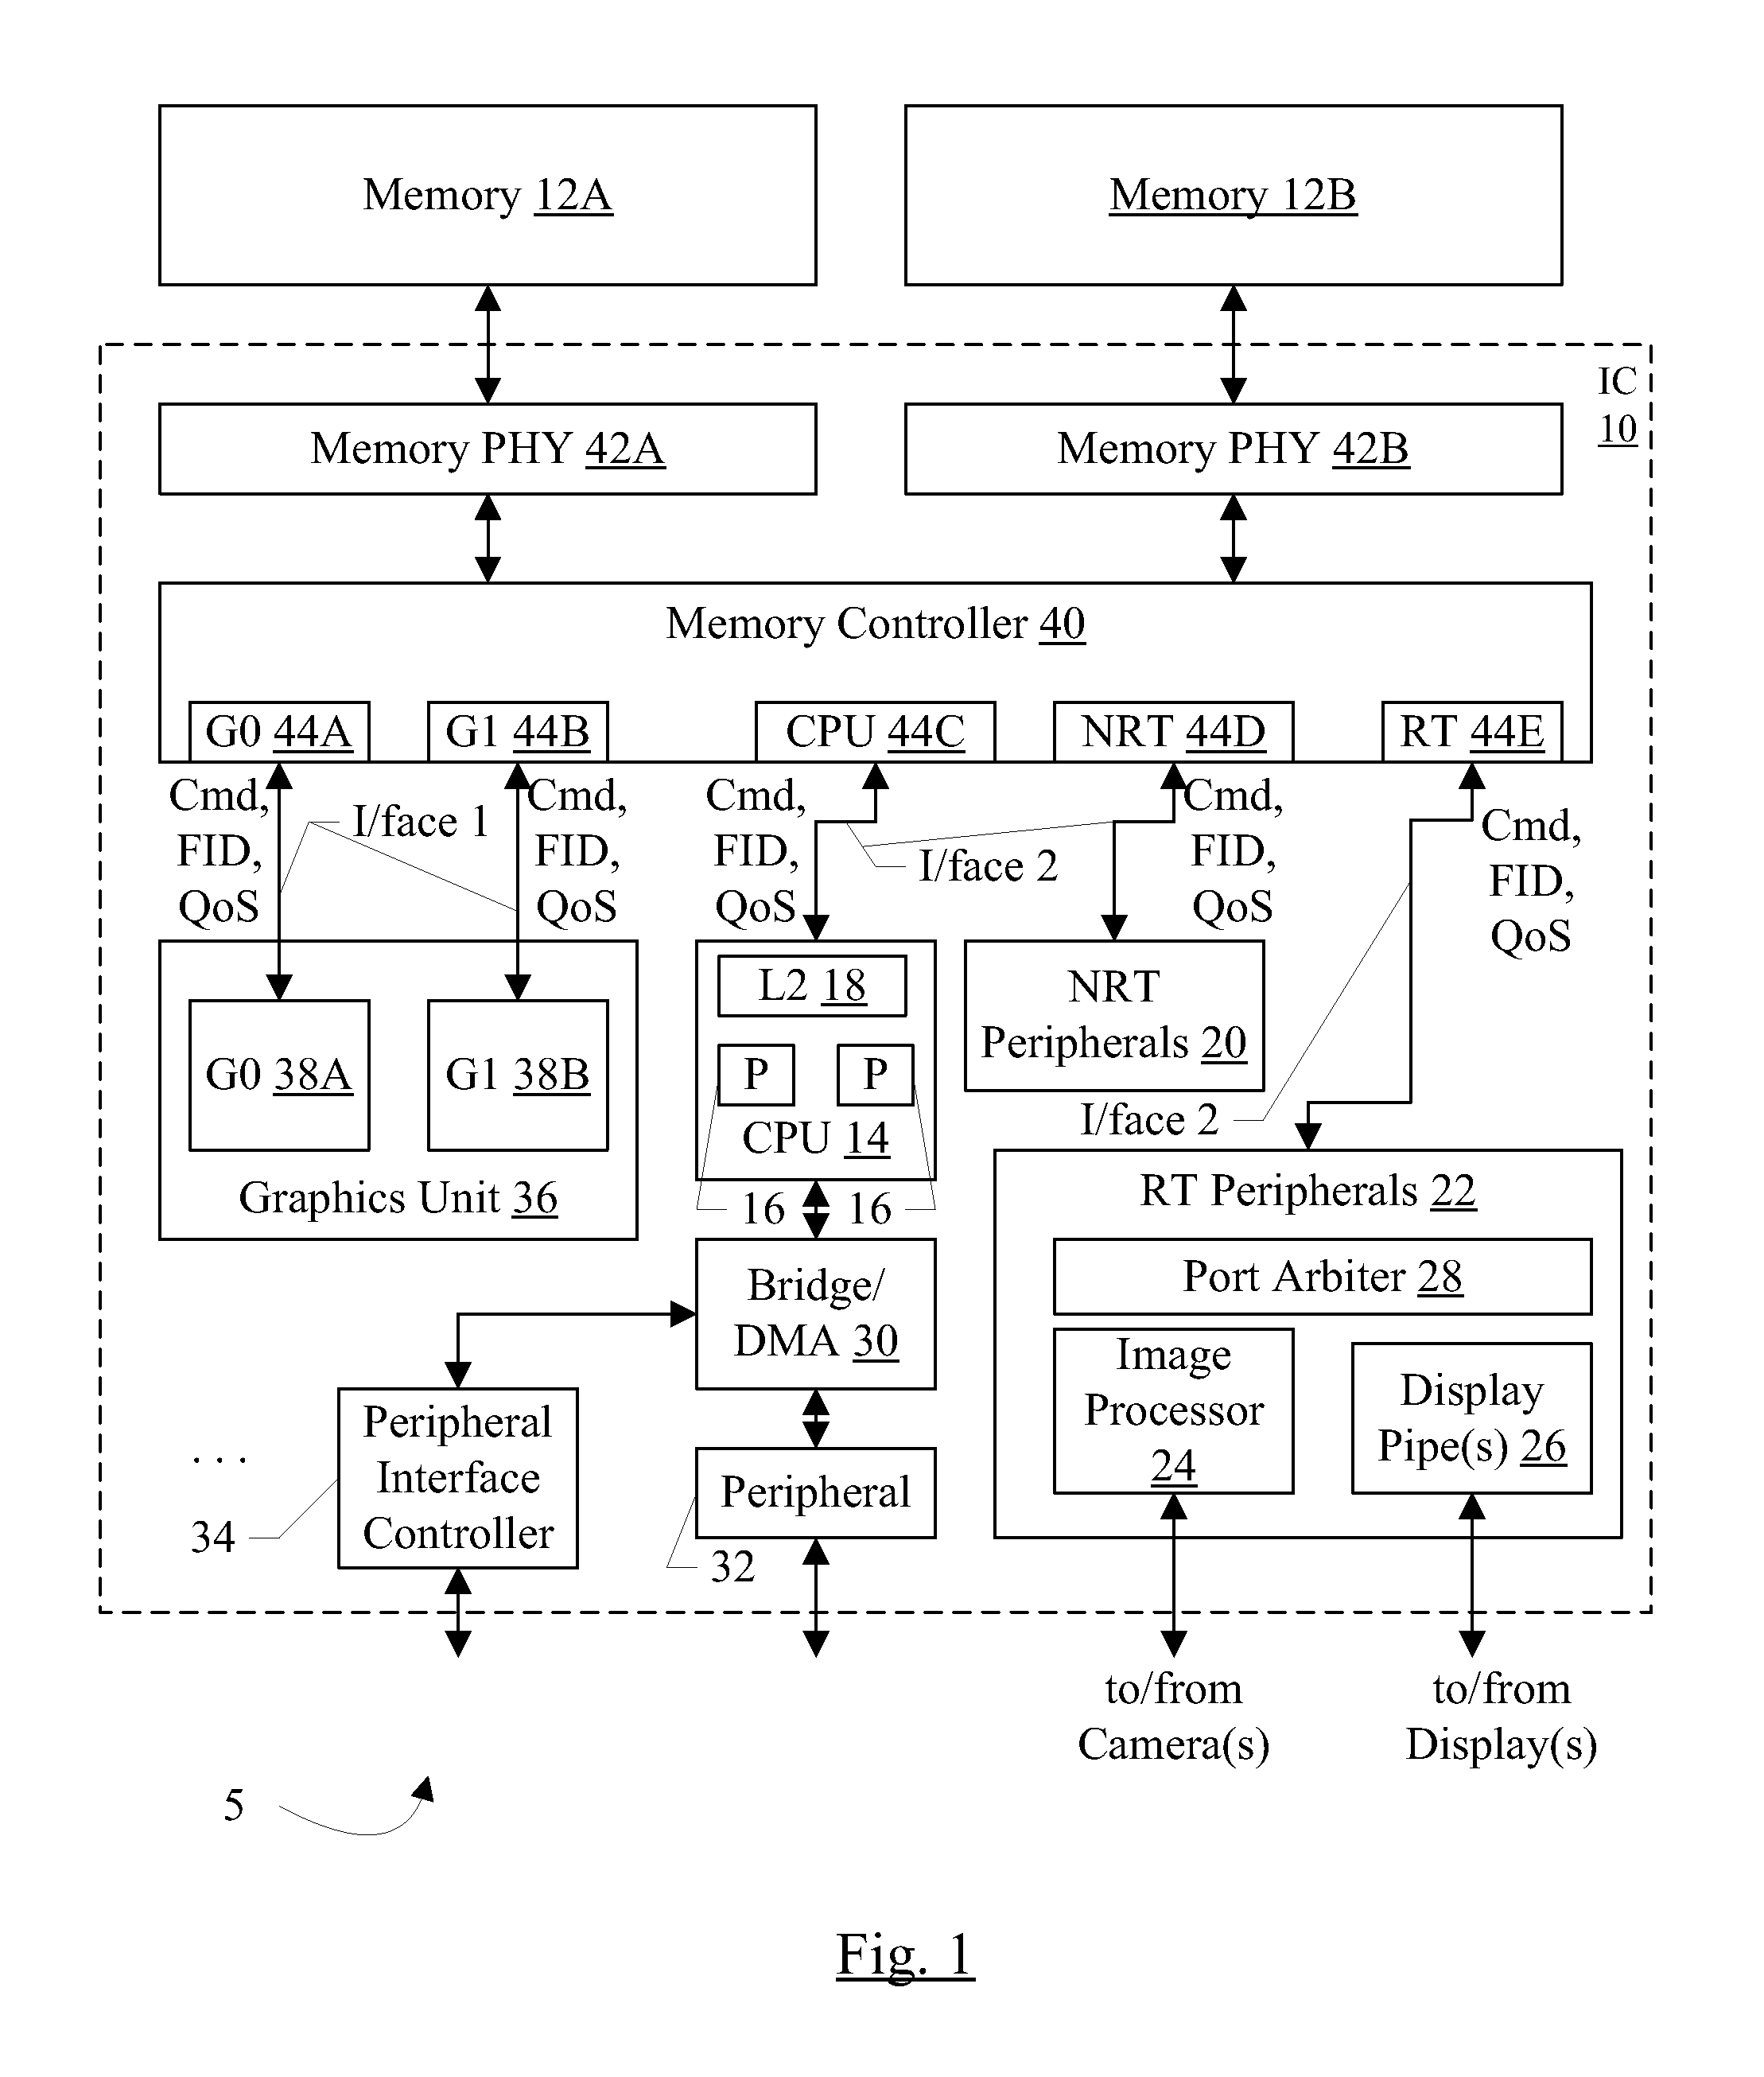 Multi-Ported Memory Controller with Ports Associated with Traffic Classes